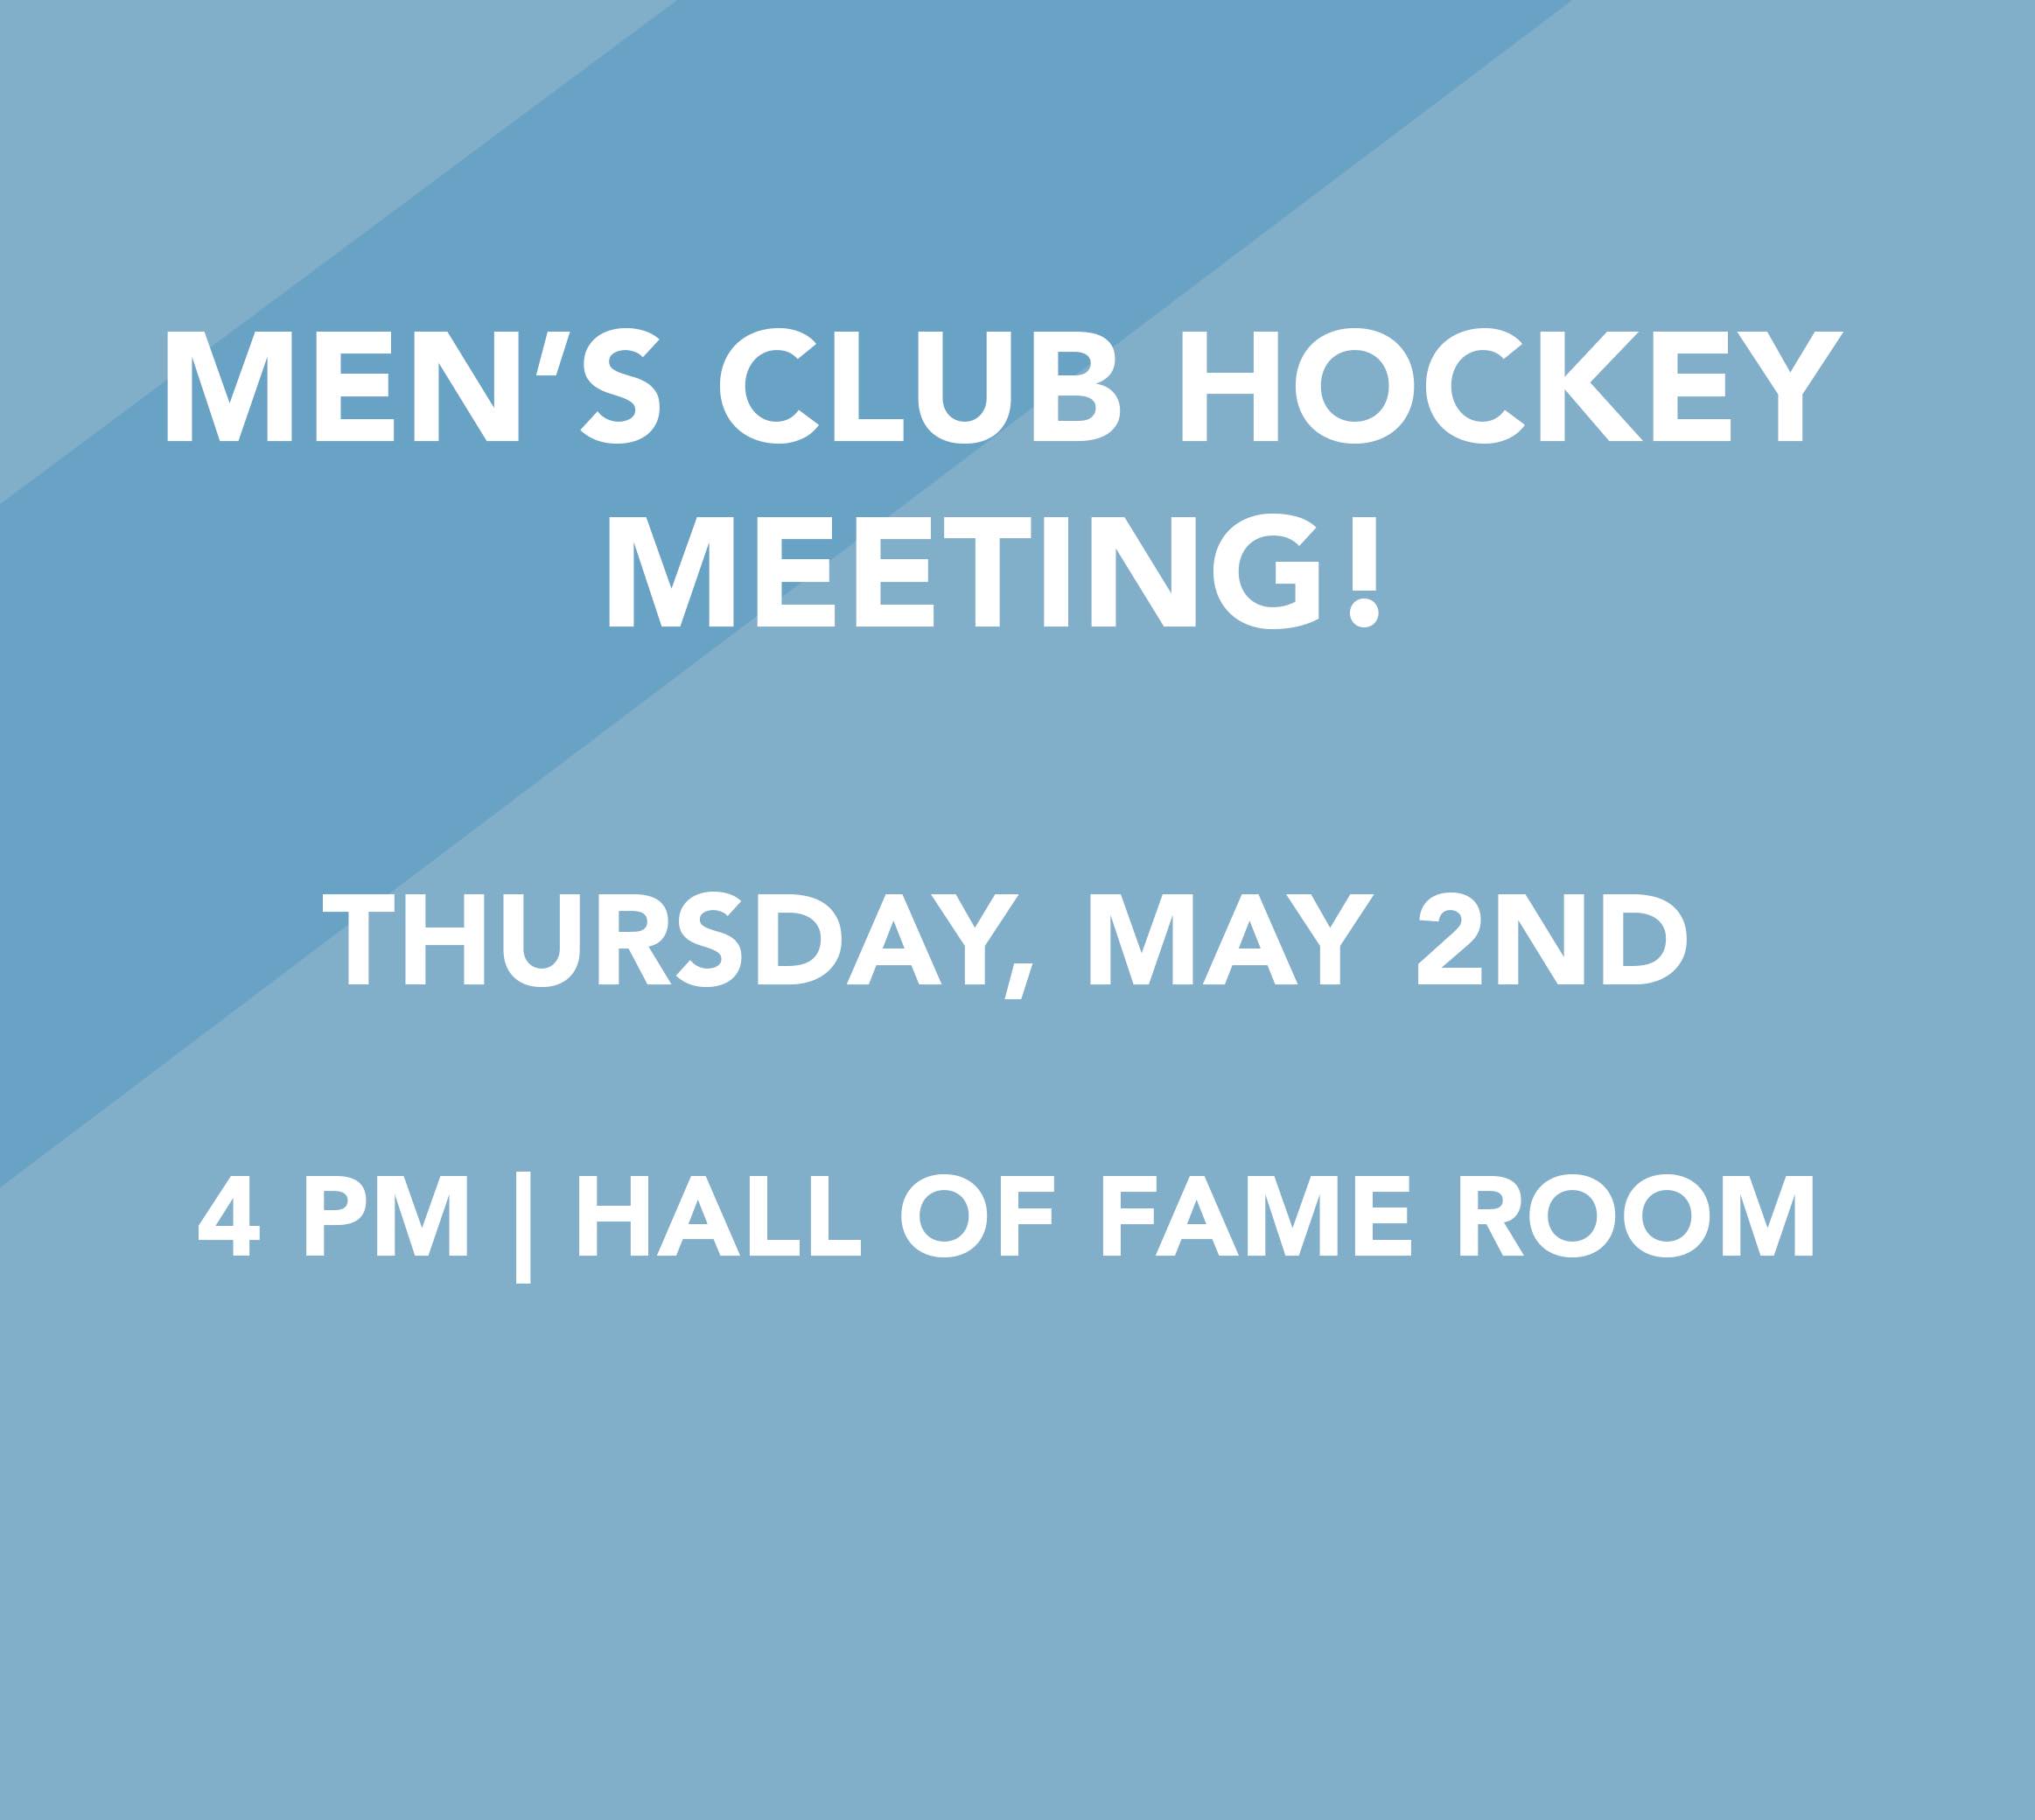 Interested in Club Hockey?

There will be an interesting meeting for Men's Club Hockey Thursday, May 2nd at 4pm in the Hall of Fame Room in Glenbrook!

Those interested that can not make the meeting can reach out to Chance Fee at cjf07130@vermontstate.edu.